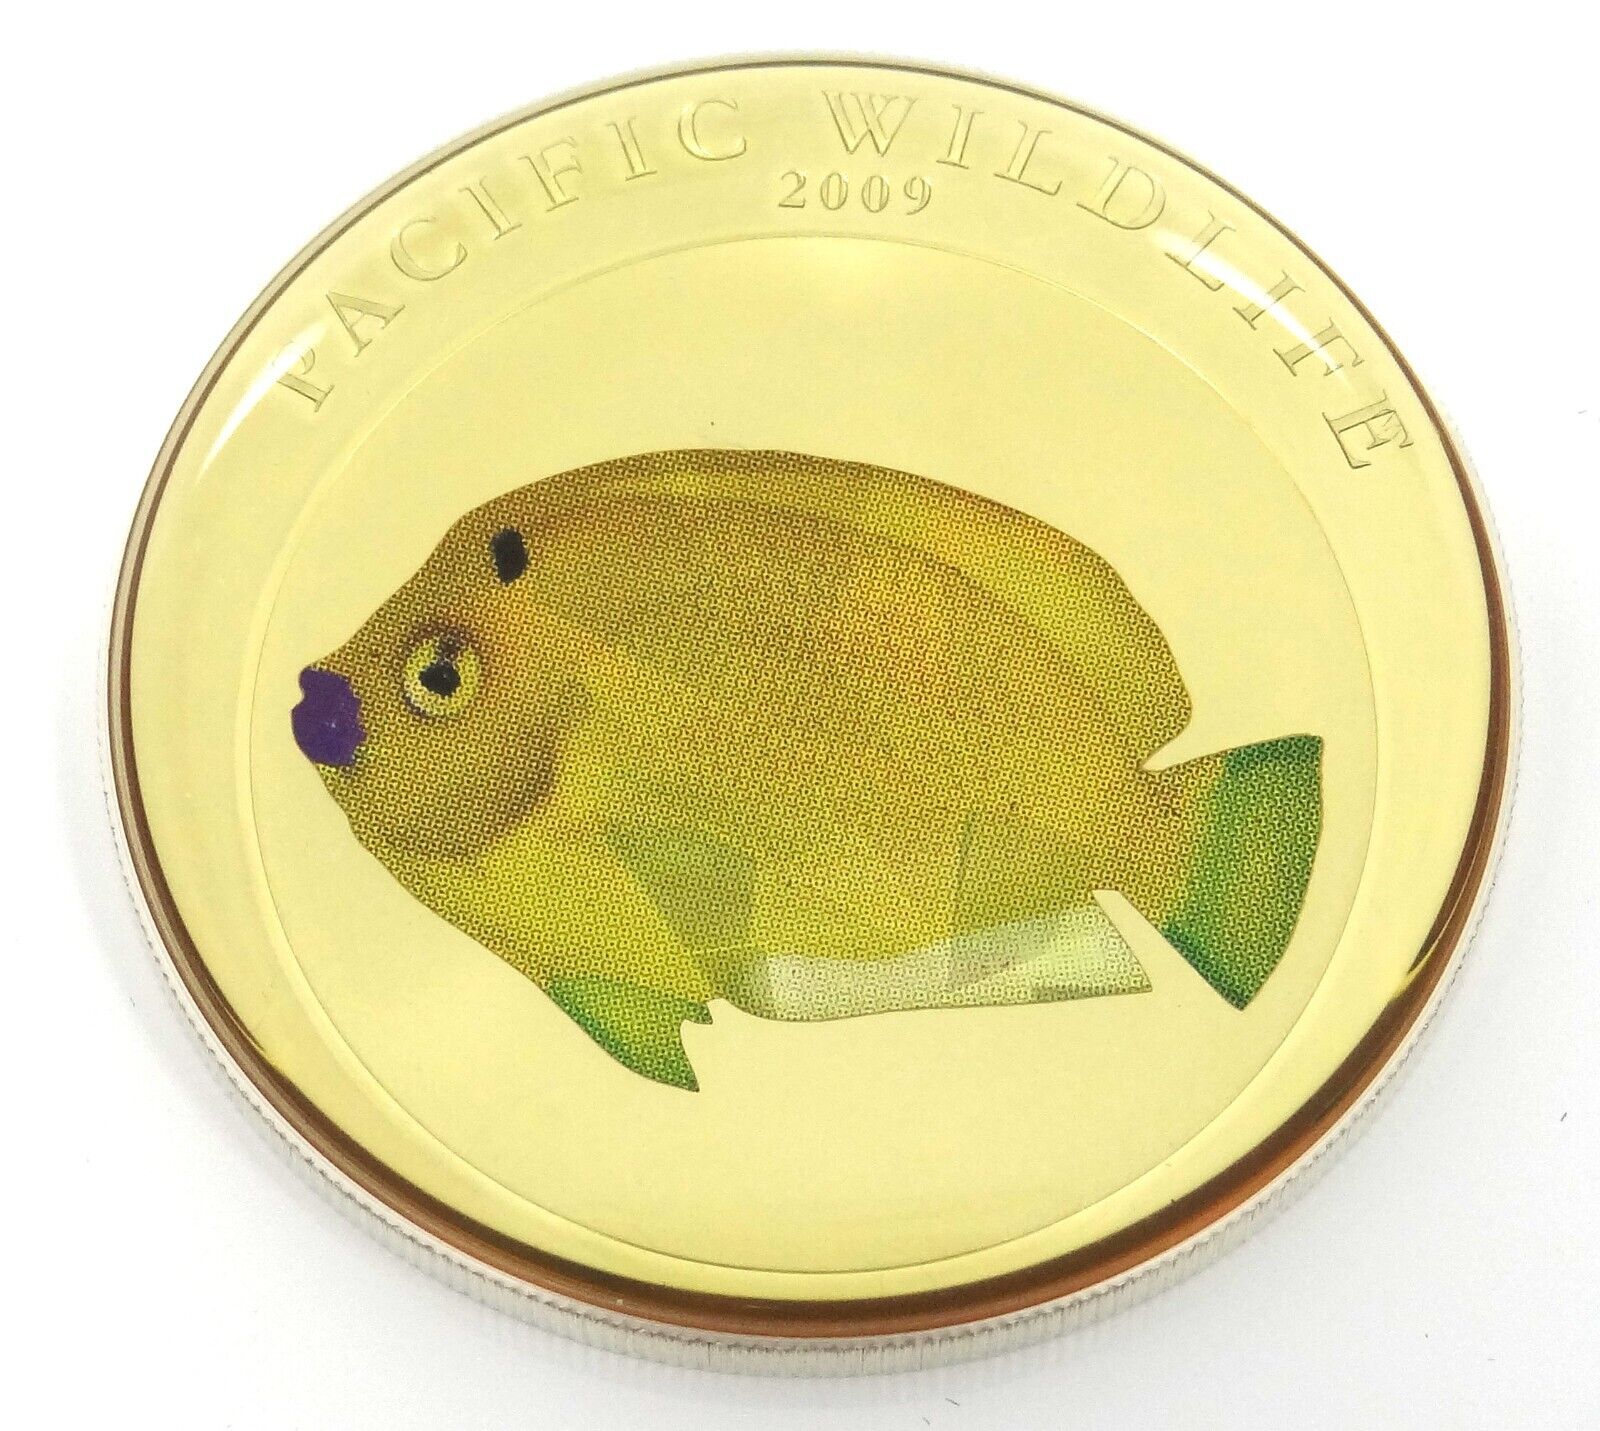 25g Silver Coin 2009 $5 Palau Pacific Wildlife Flagfin Angelfish Prism OGP-classypw.com-1